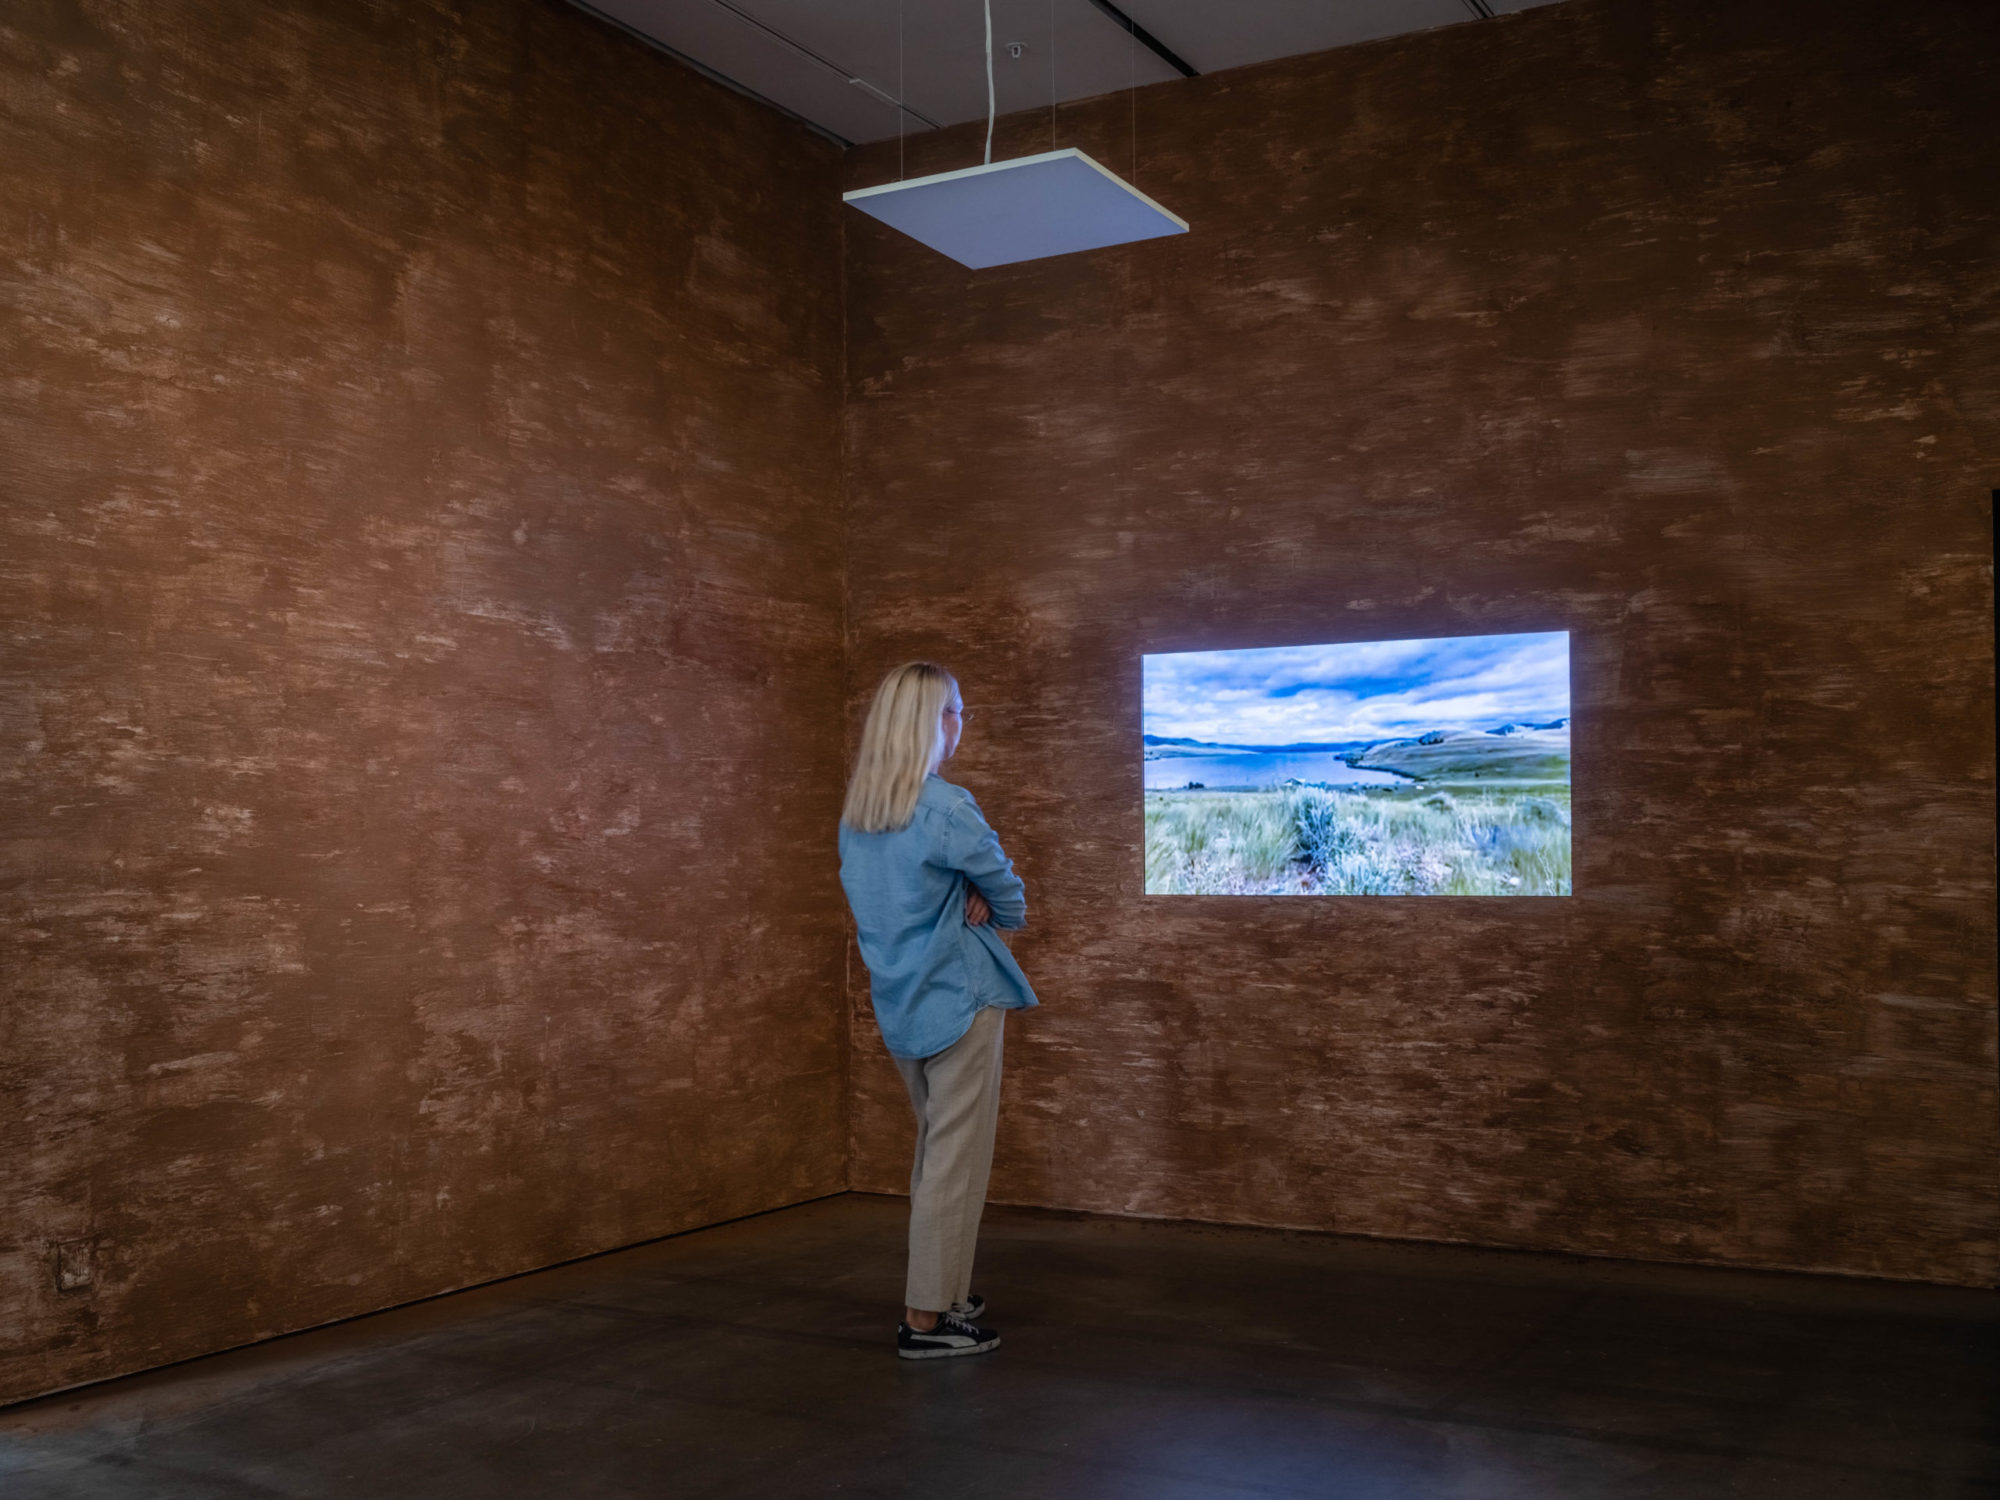 An image of a woman regarding a projection of a landscape with a lake surrounded by a meadow under a cloudy sky — a partial view of the Syilx (Okanagan) Nation’s territory — in a gallery room with brown, wooden walls